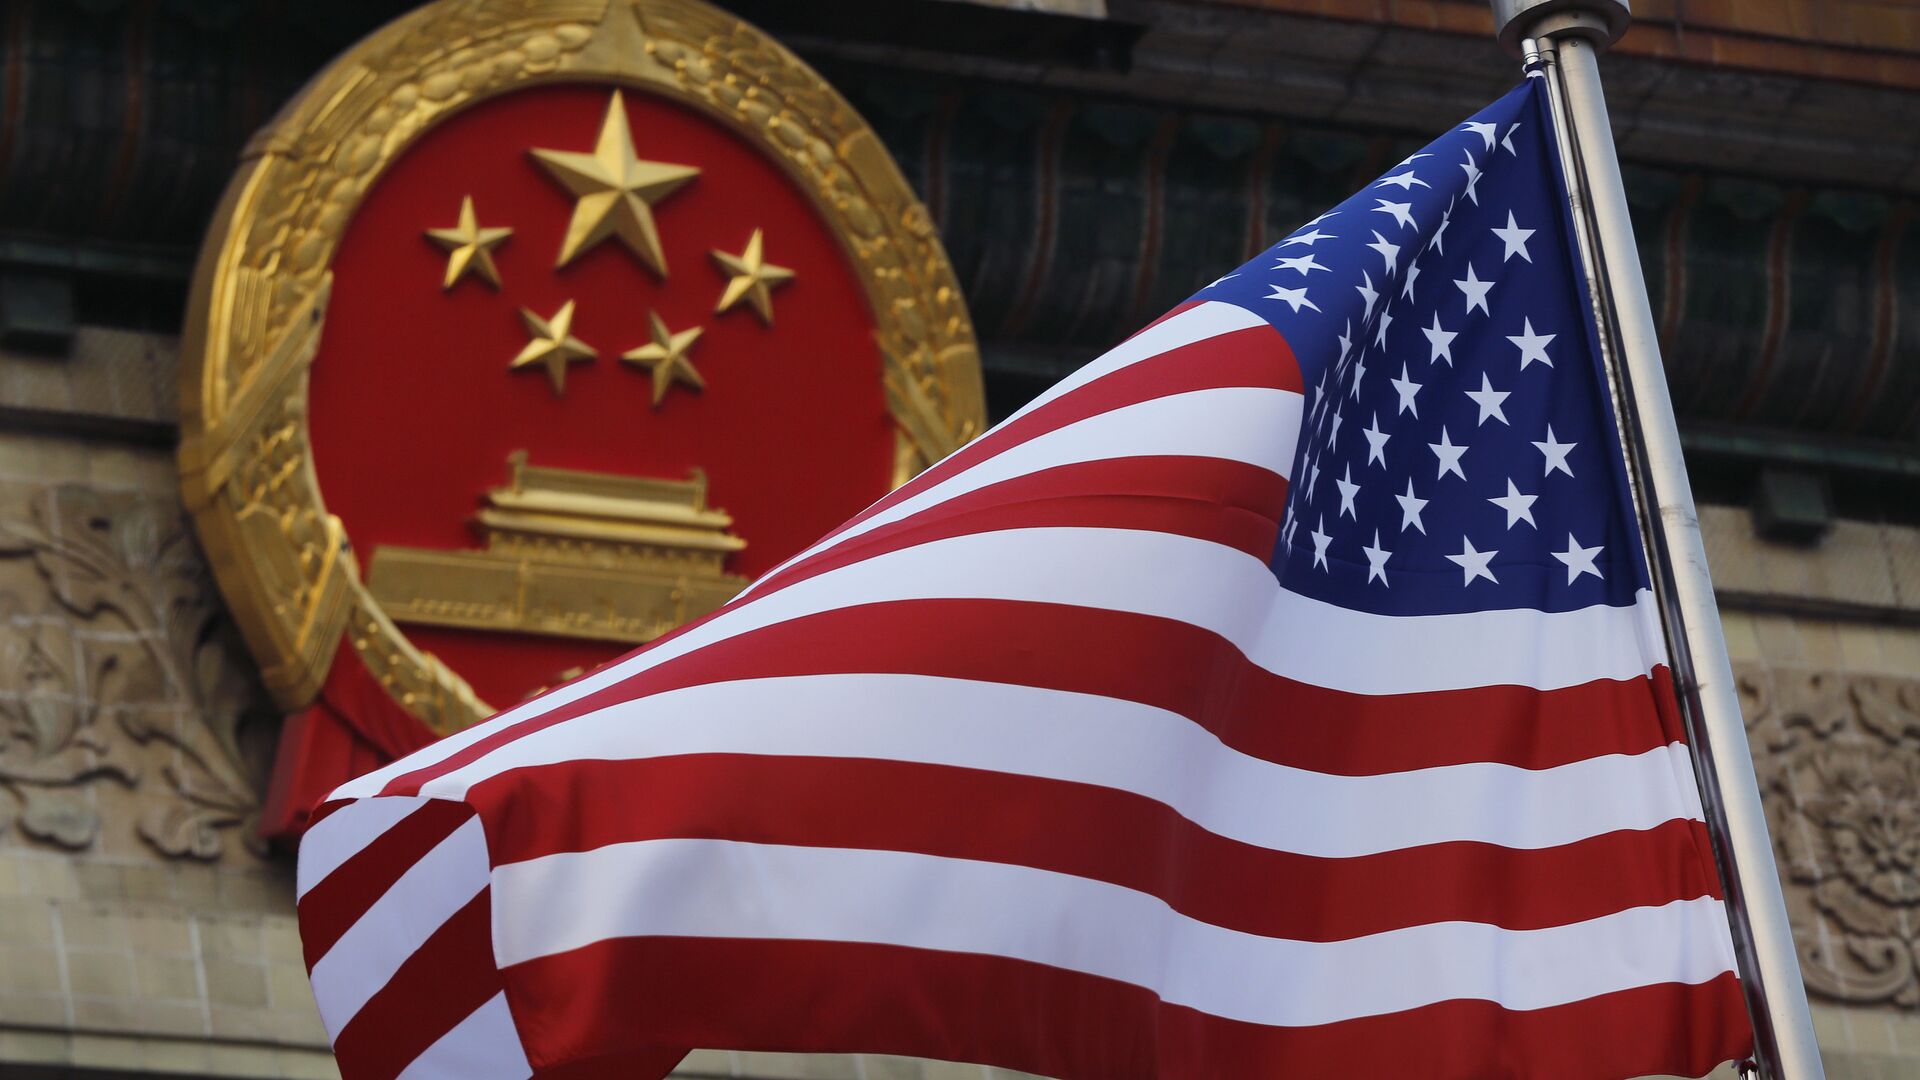 FILE - In this 9 November 2017 file photo, an American flag is flown next to the Chinese national emblem during a welcome ceremony for visiting US President Donald Trump outside the Great Hall of the People in Beijing - Sputnik International, 1920, 27.03.2021